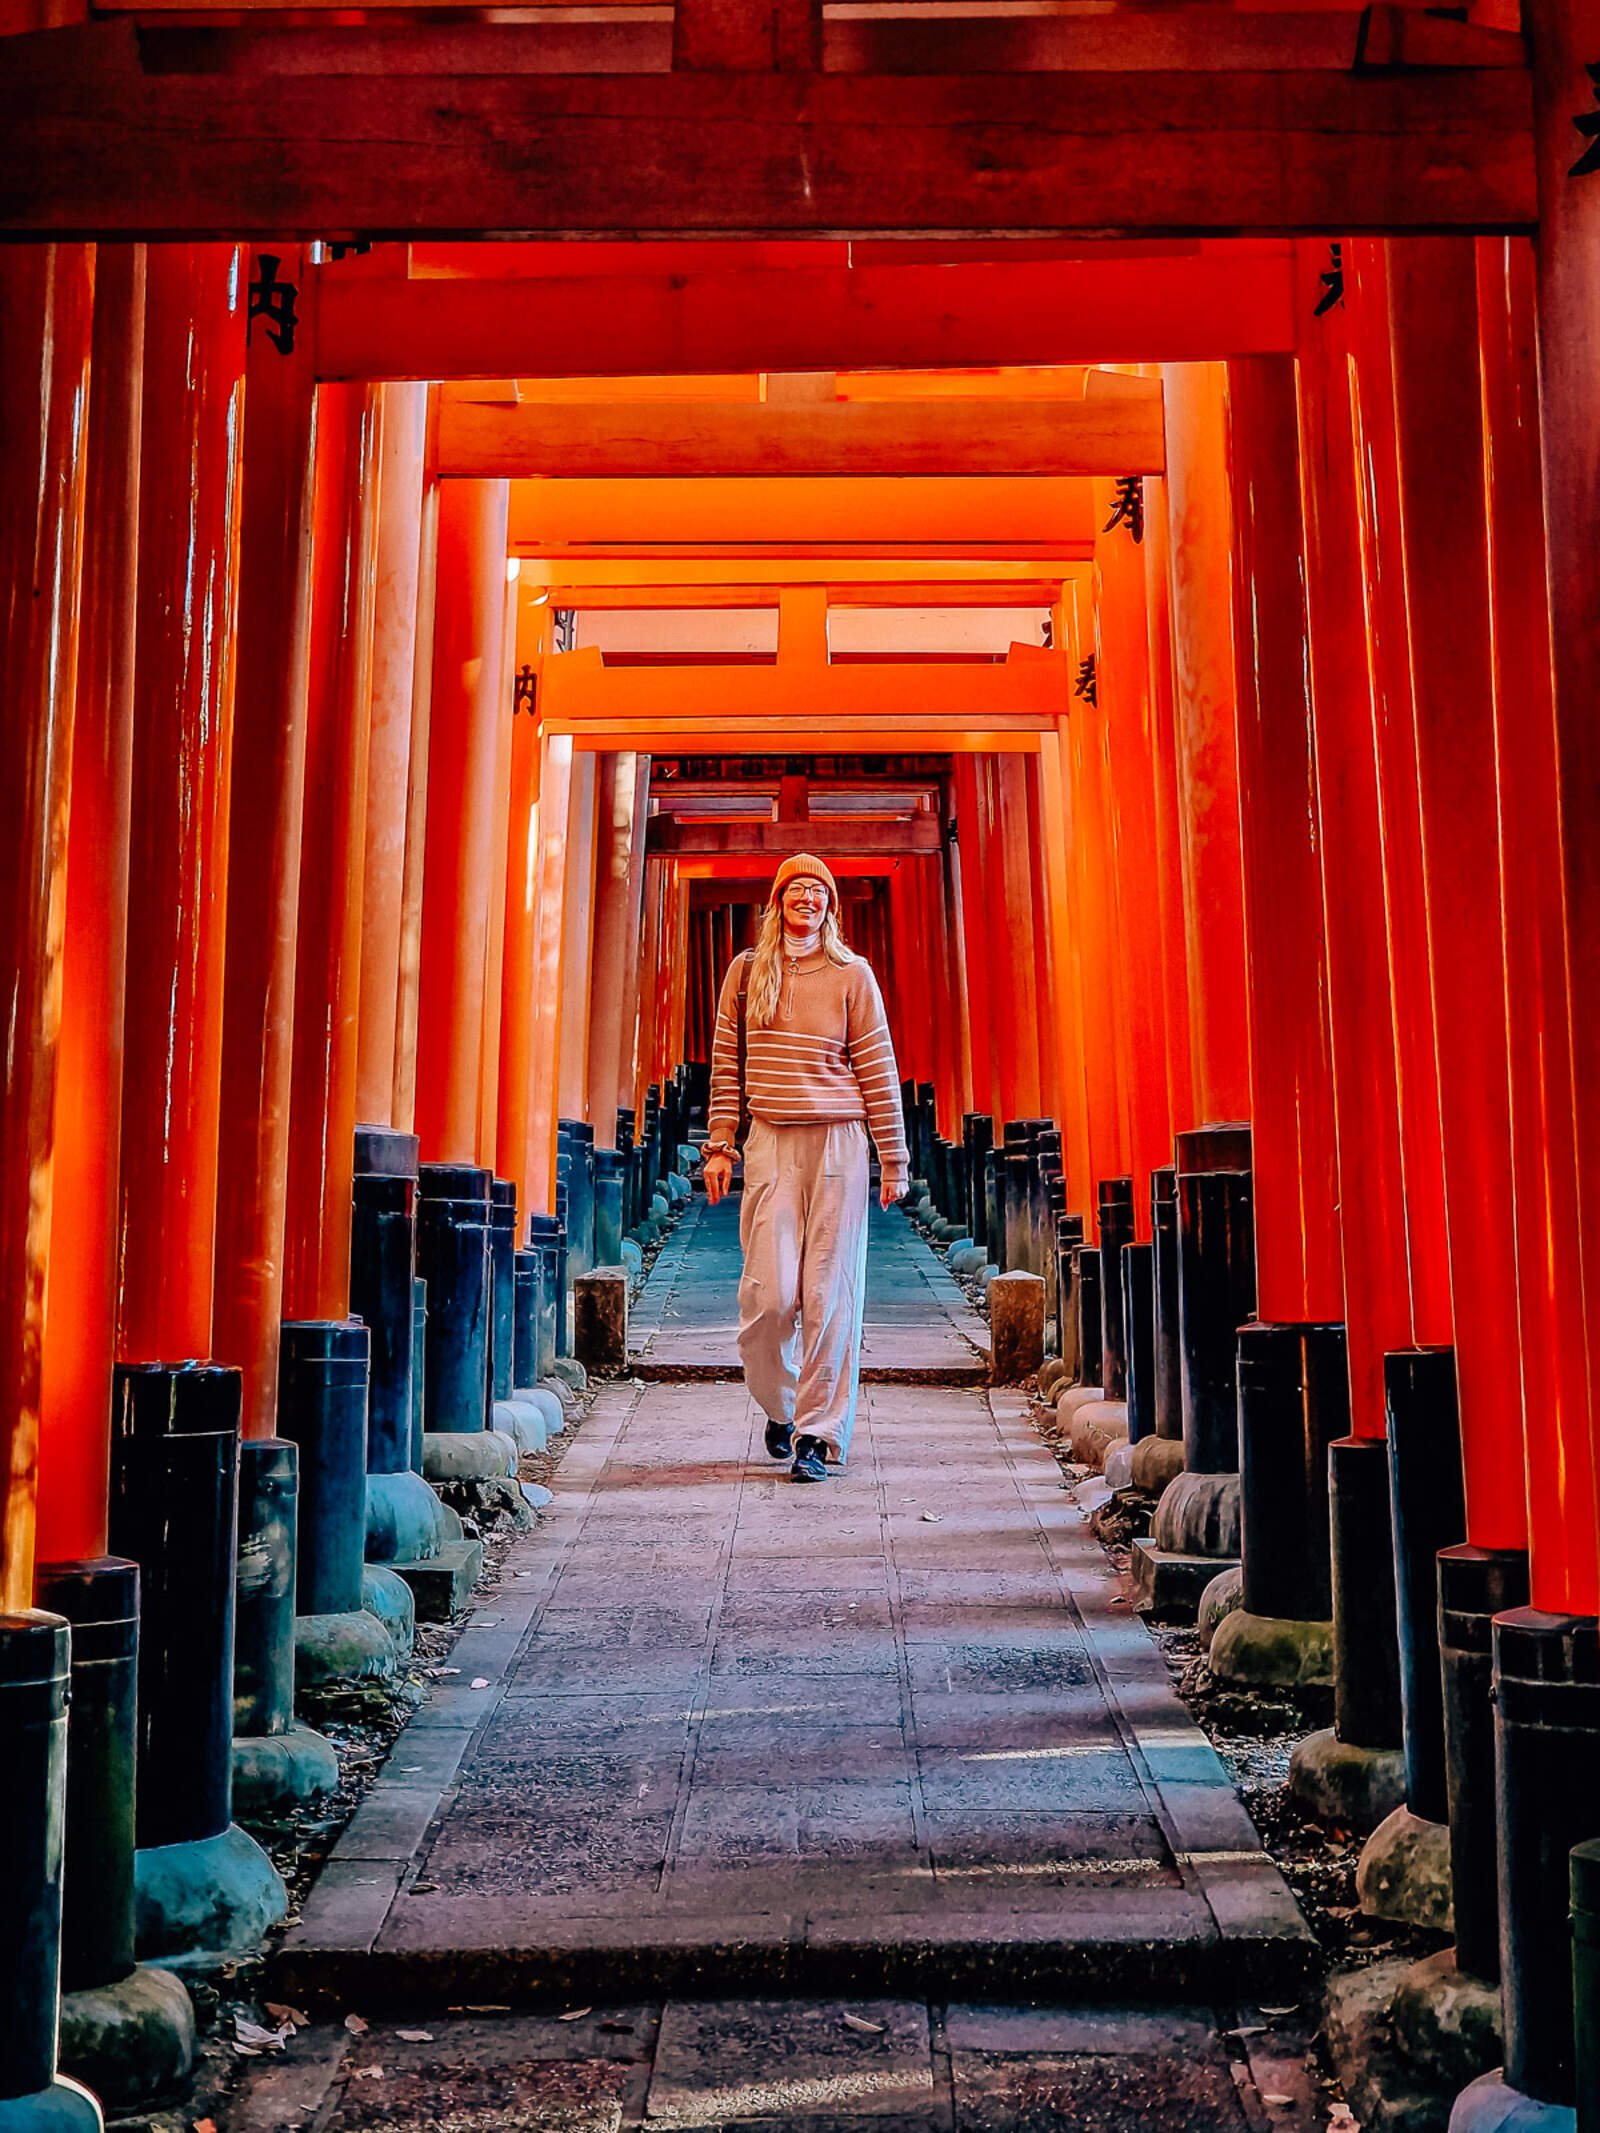 Helena walking down a path with orange arches all the way along - Japanese torii gates